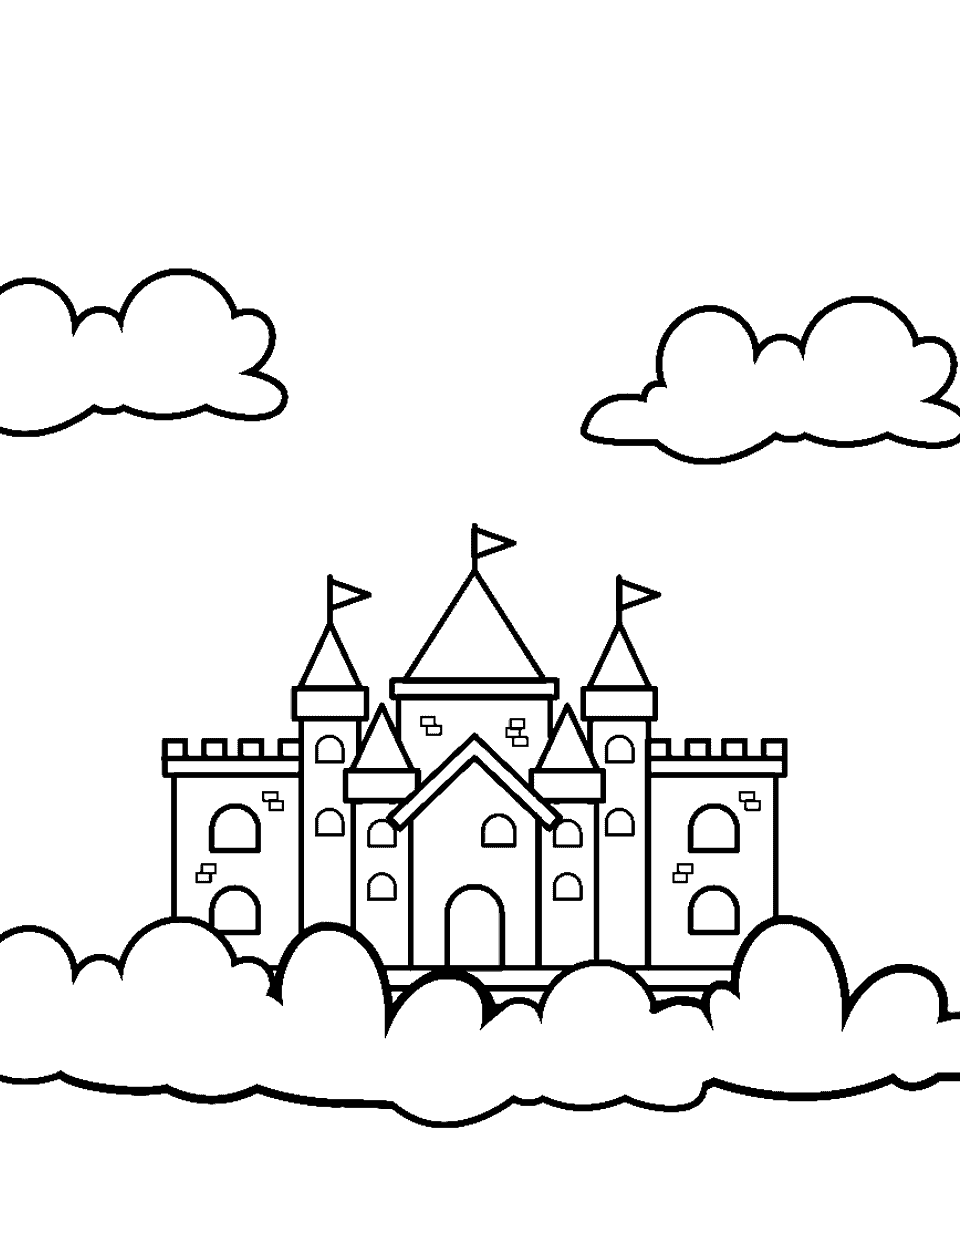 Castle Clouds Coloring Page - A castle above the clouds in the sky.